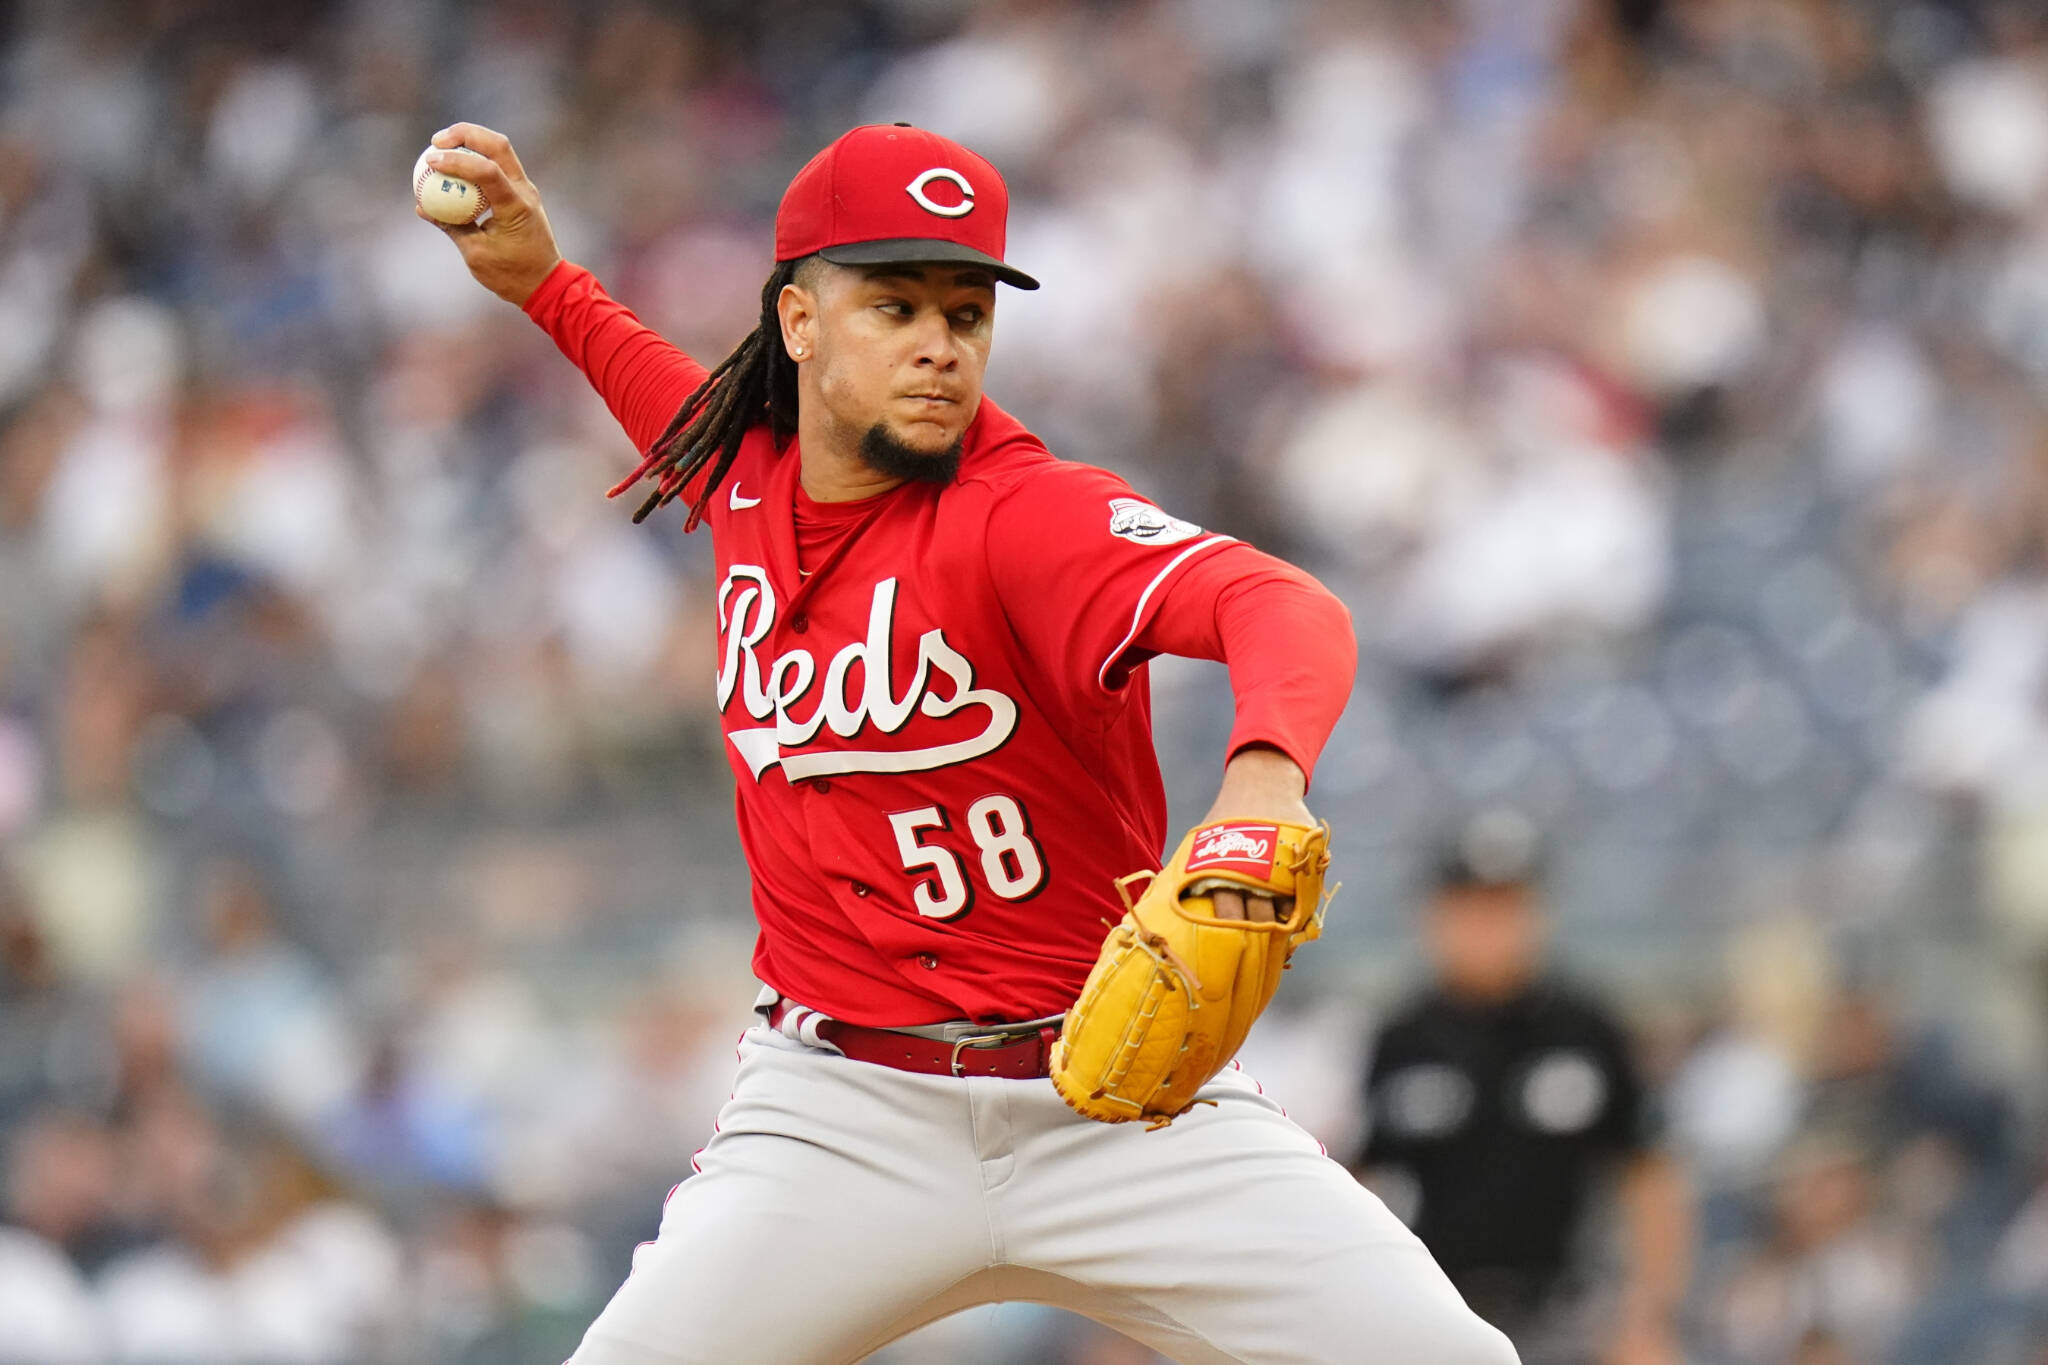 The Reds’ Luis Castillo pitches during the first inning of a game against the Yankees on July 14 in New York. (AP Photo/Frank Franklin II)